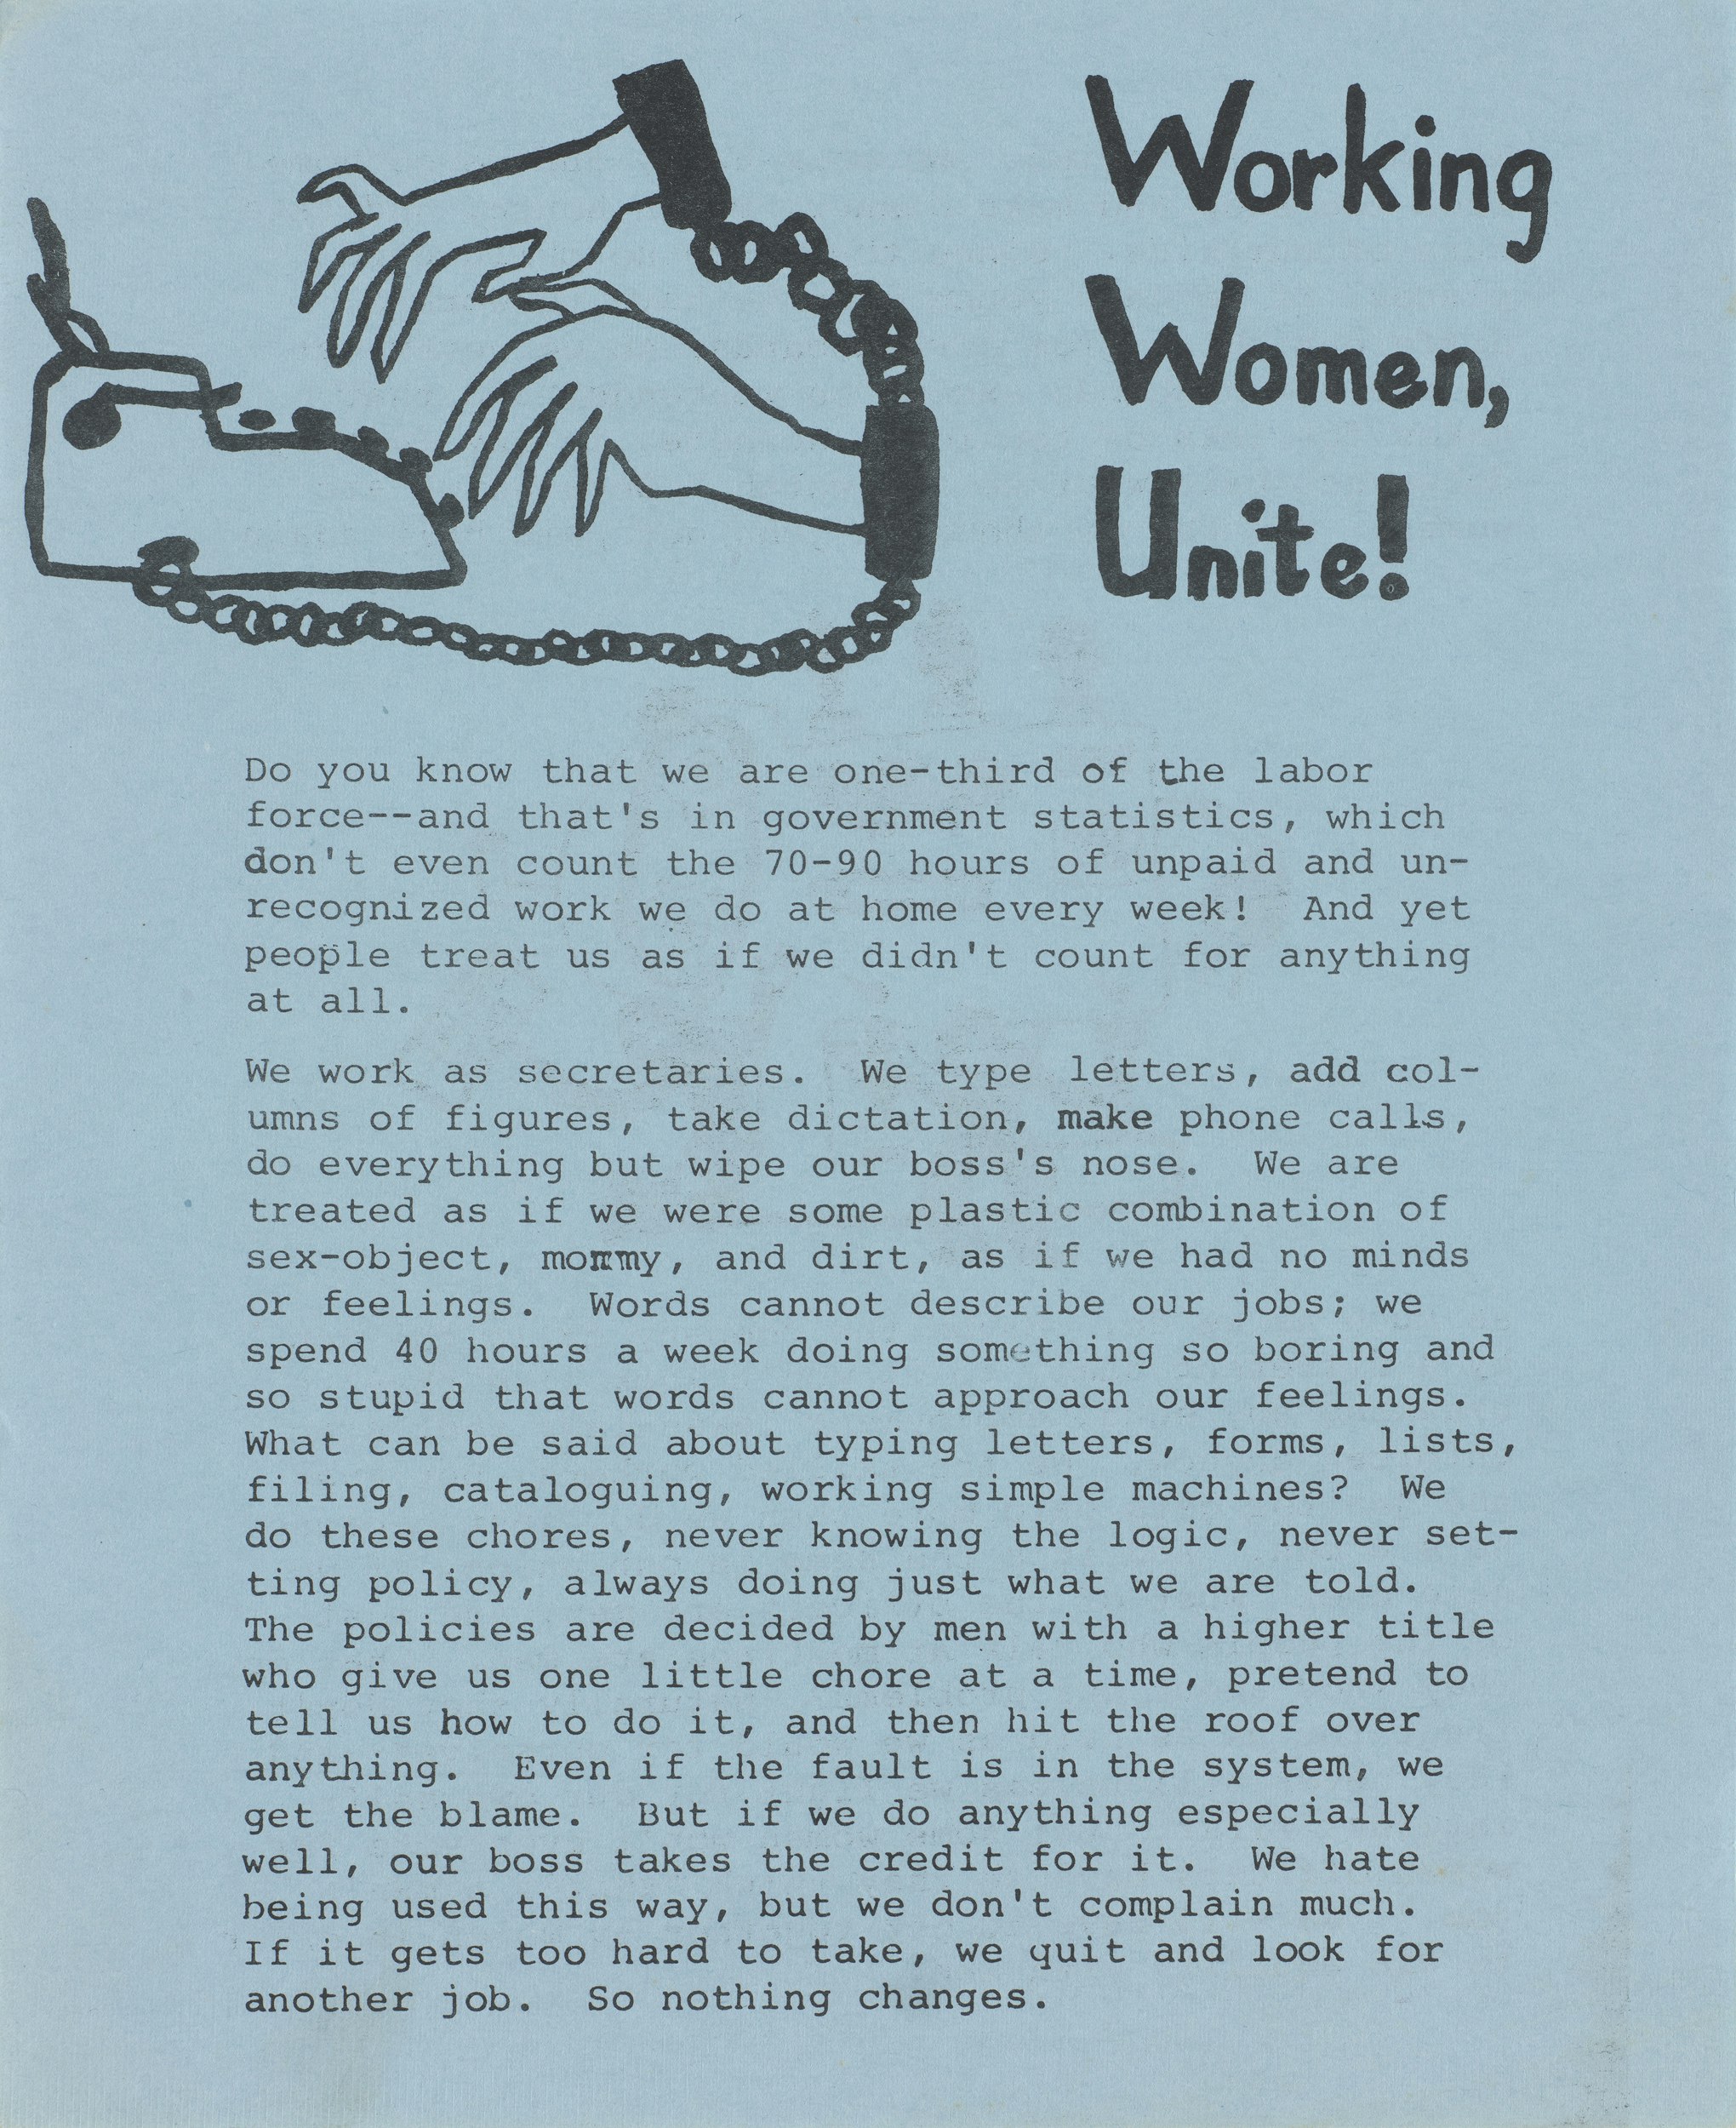 2023 12 15 Working Women Unite Pamphlet Radcliffe C1 Huctw 05 1 Jf